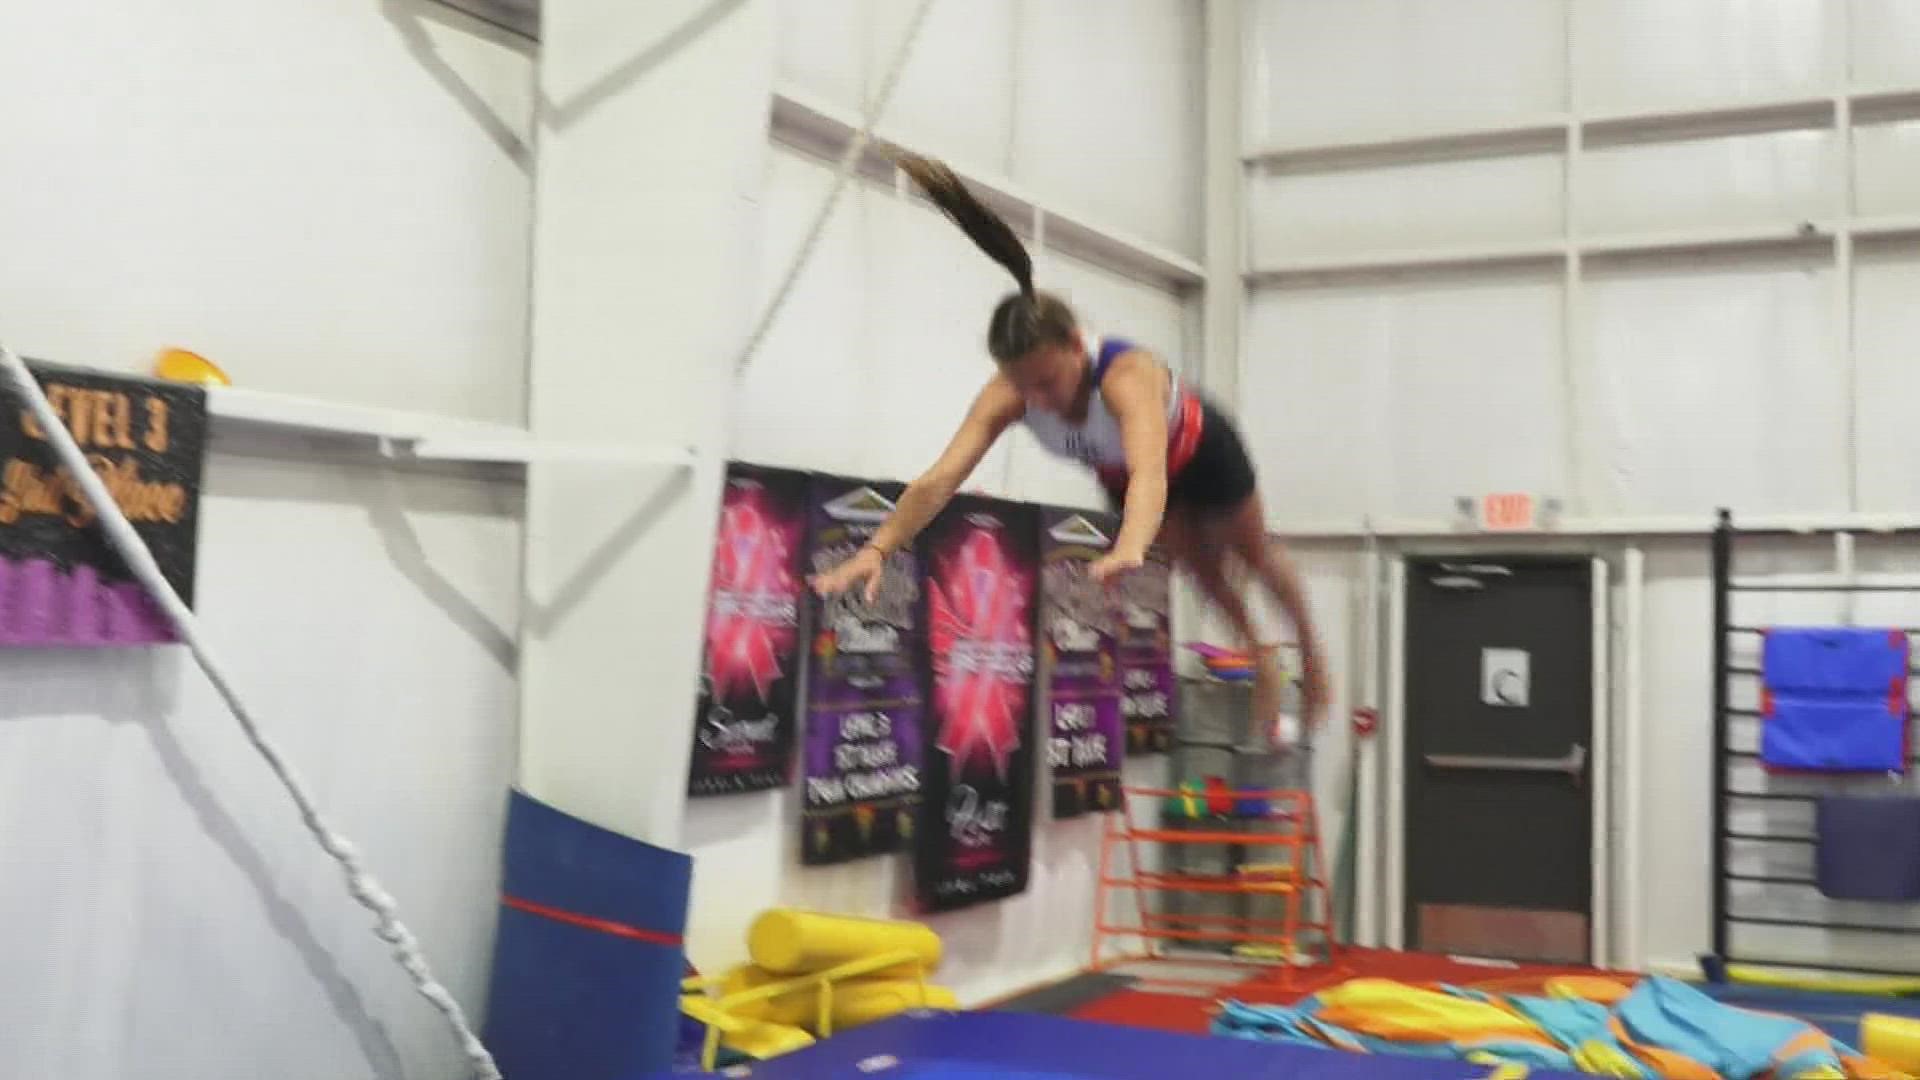 Cammie Cooper of Knoxville will compete in the double mini trampoline event in Azerbaijan at the 2021 Trampoline Gymnastics World Age Group Competitions.